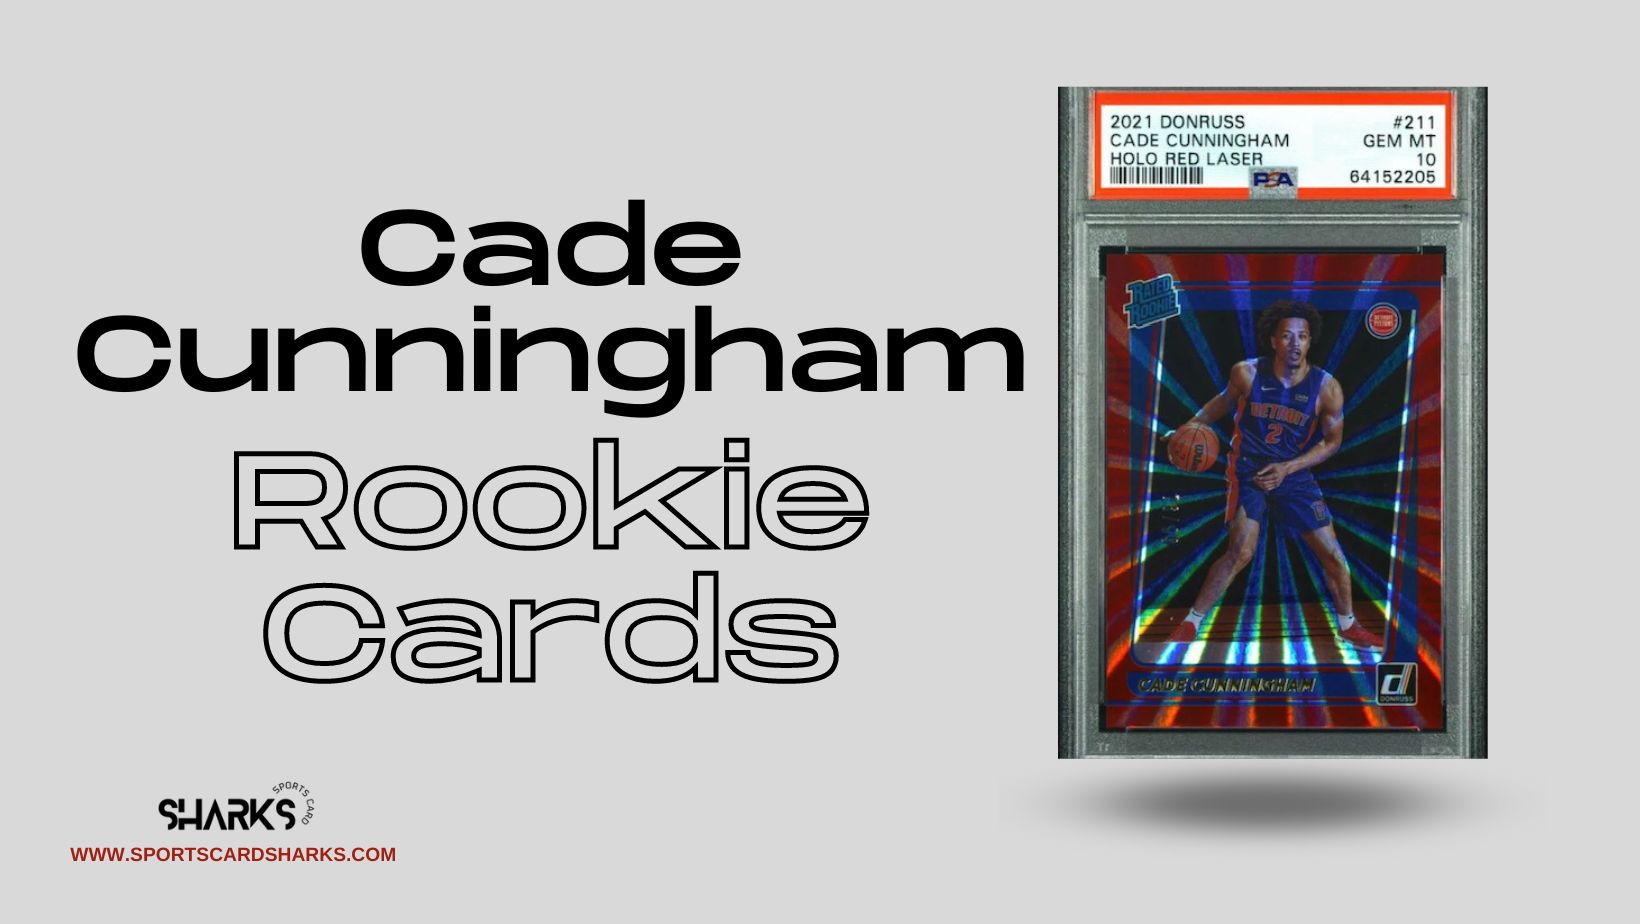 Featured image for the Best Cade Cunningham Rookie Cards blog post on Sports Card Sharks